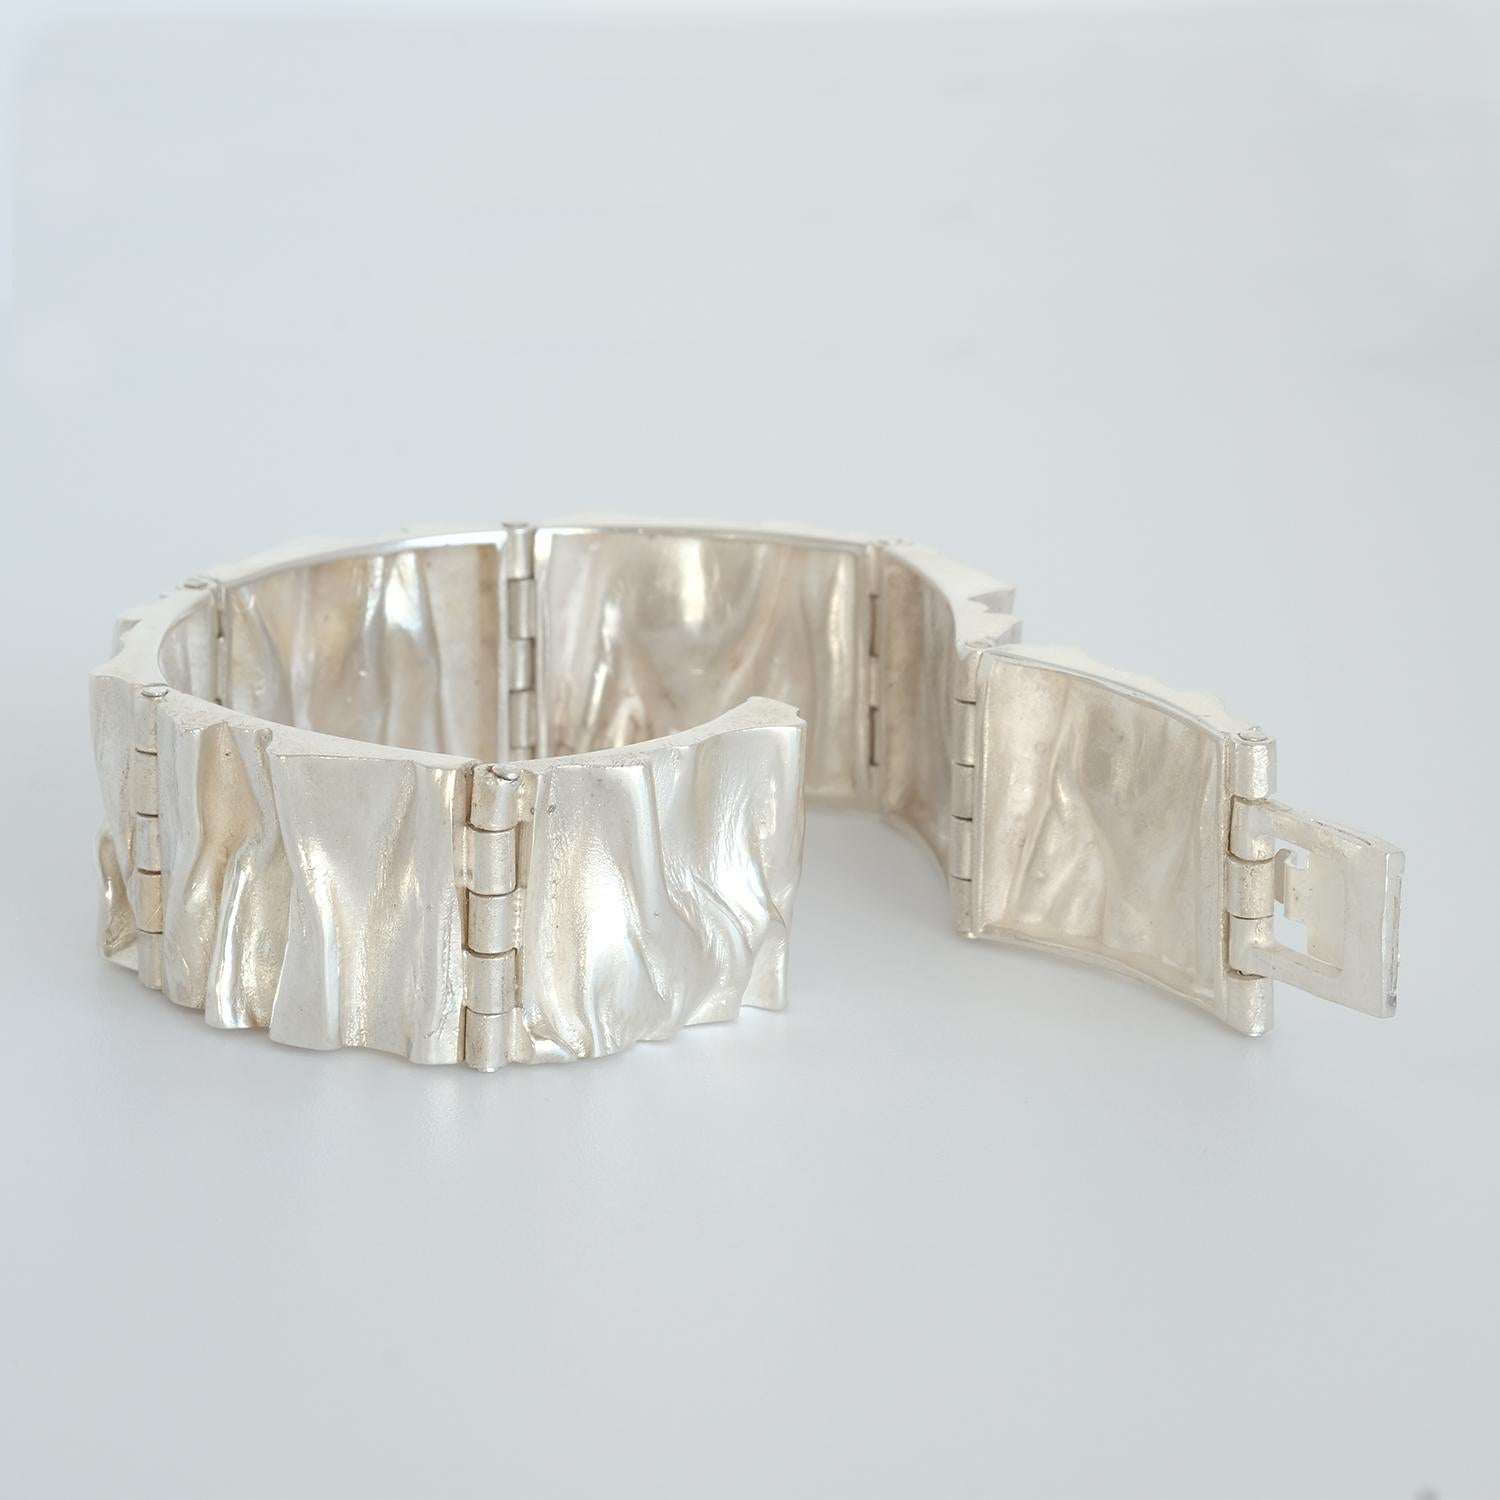 This sterling silver bracelet is called 